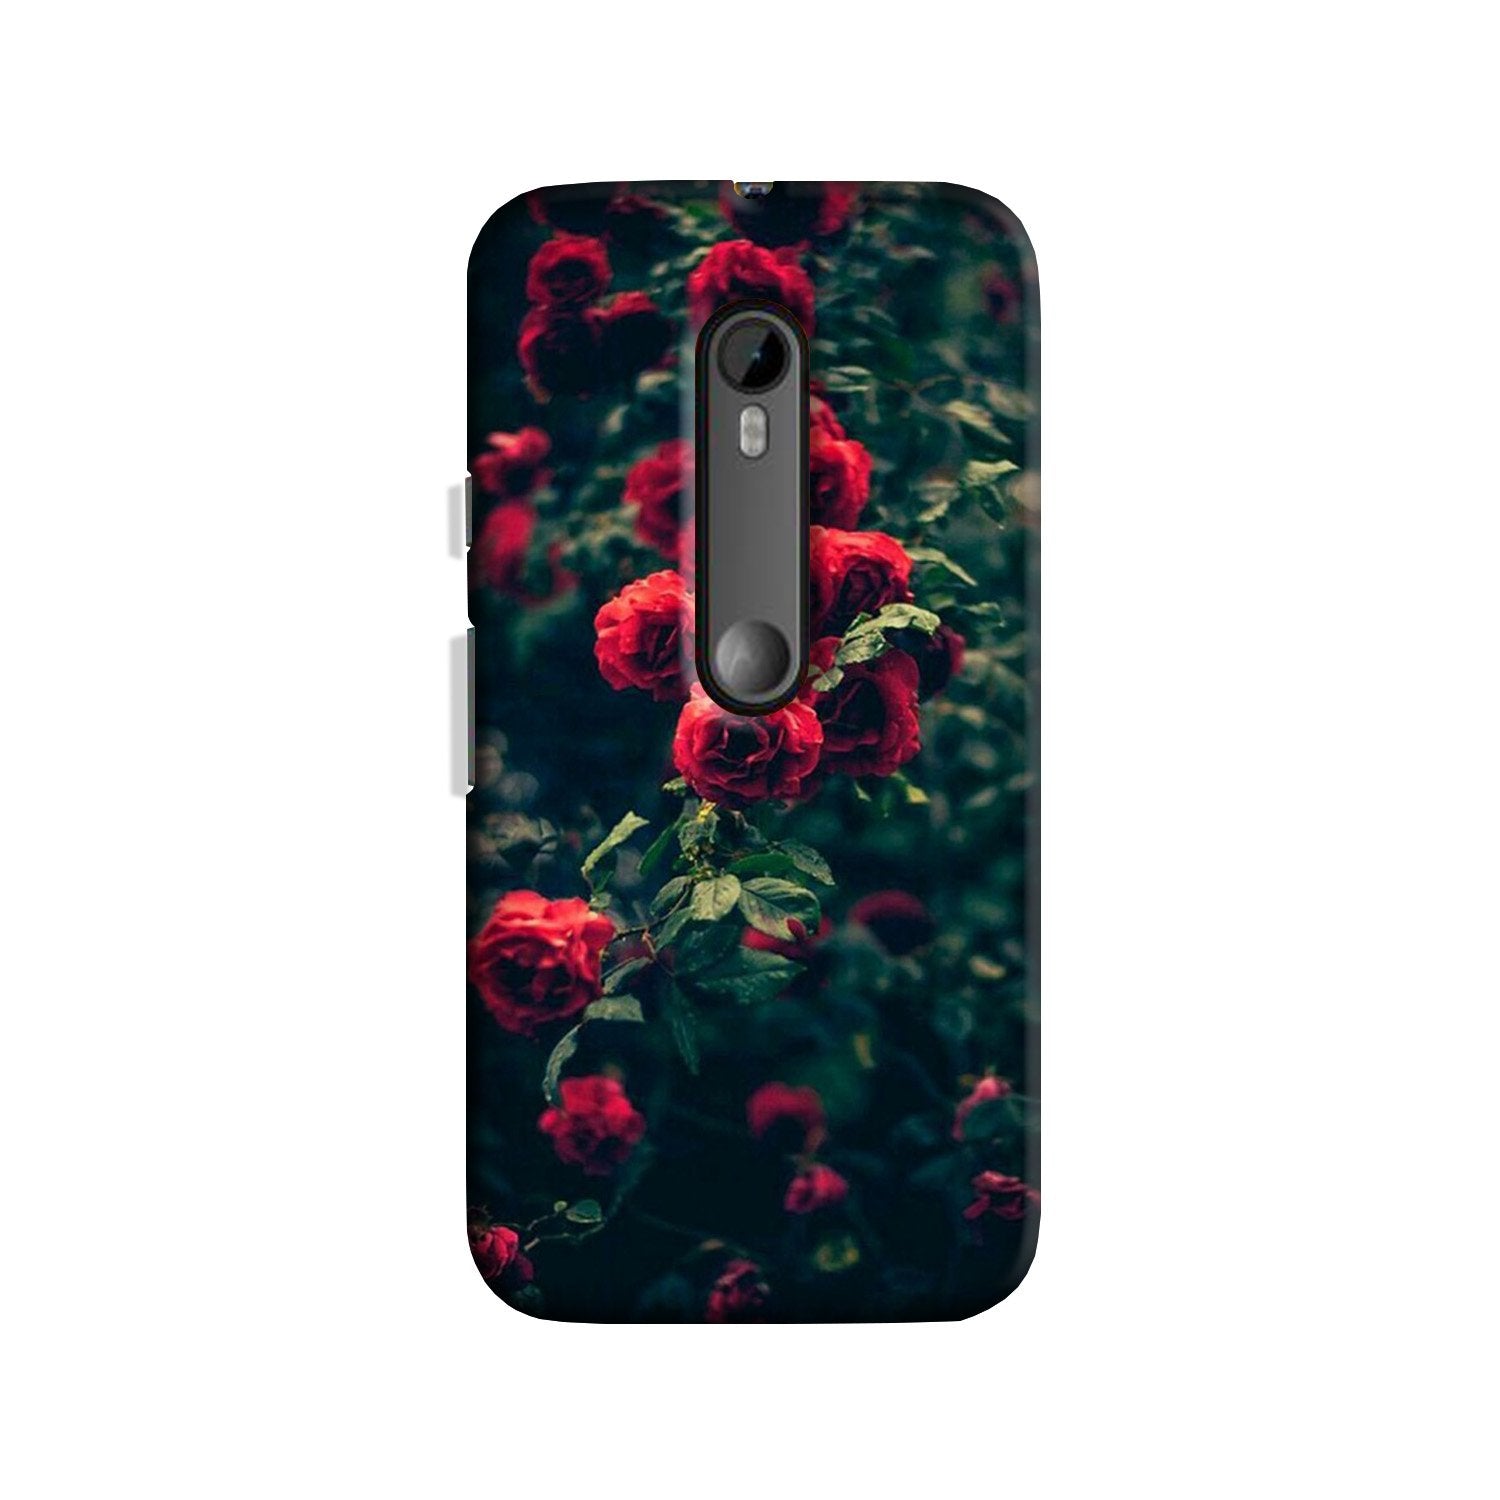 Red Rose Case for Moto X Play